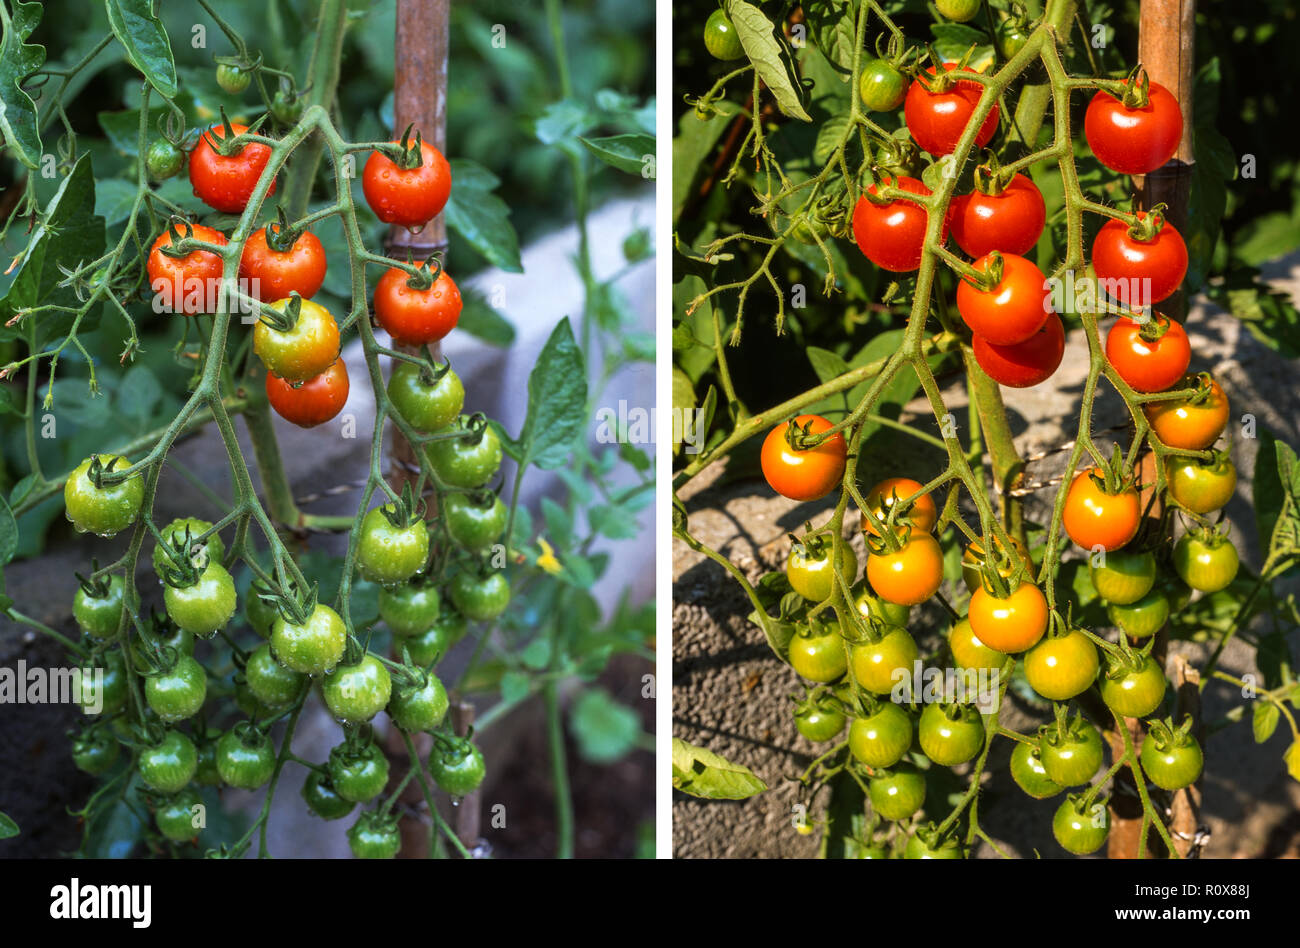 Tomato (Lycopersicon lycopersicum).These cherry tomatoes grow well and produce numerous small sweet  fruits.South-west France. Stock Photo